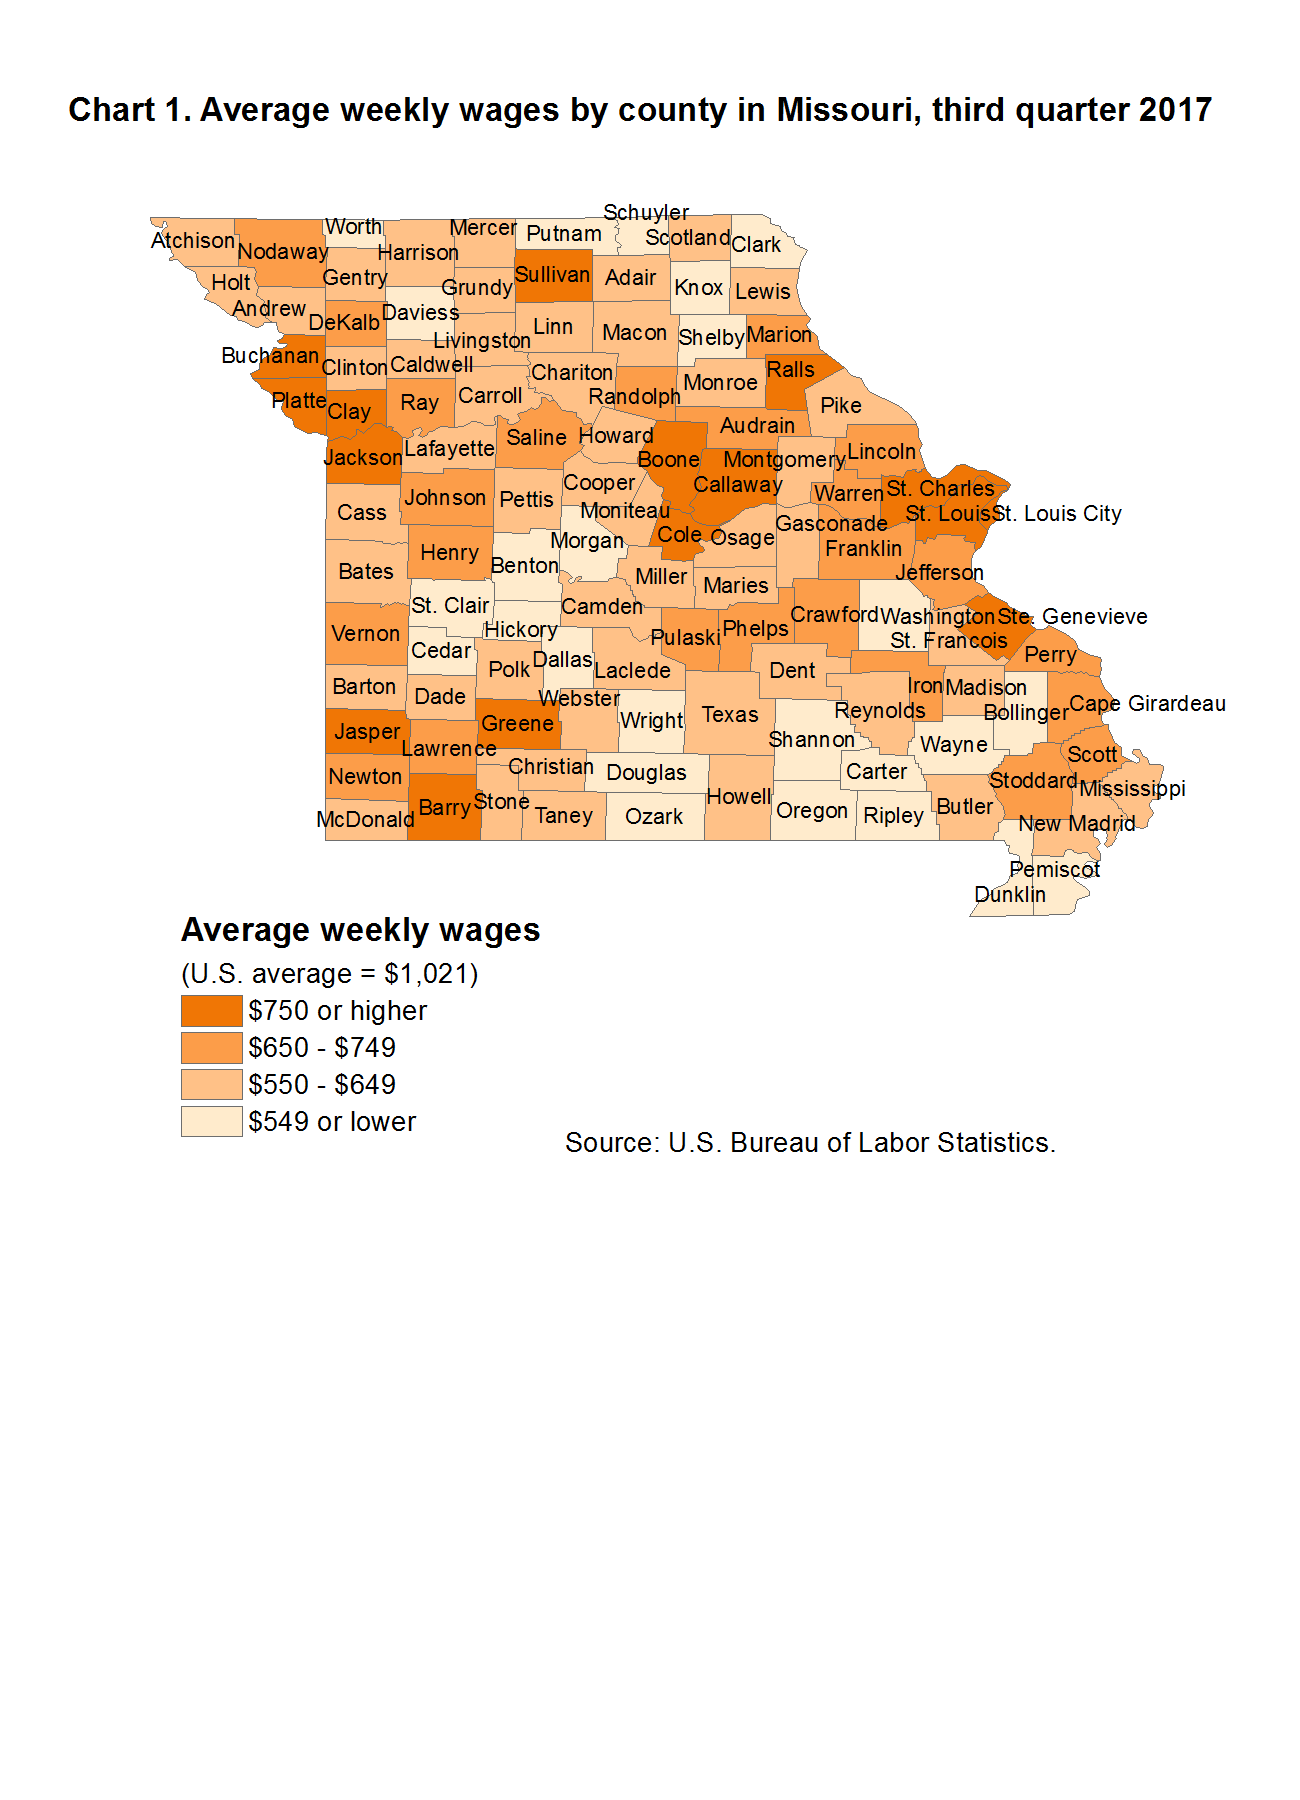 Chart 1. Average weekly wages by county in Missouri, third quarter 2017